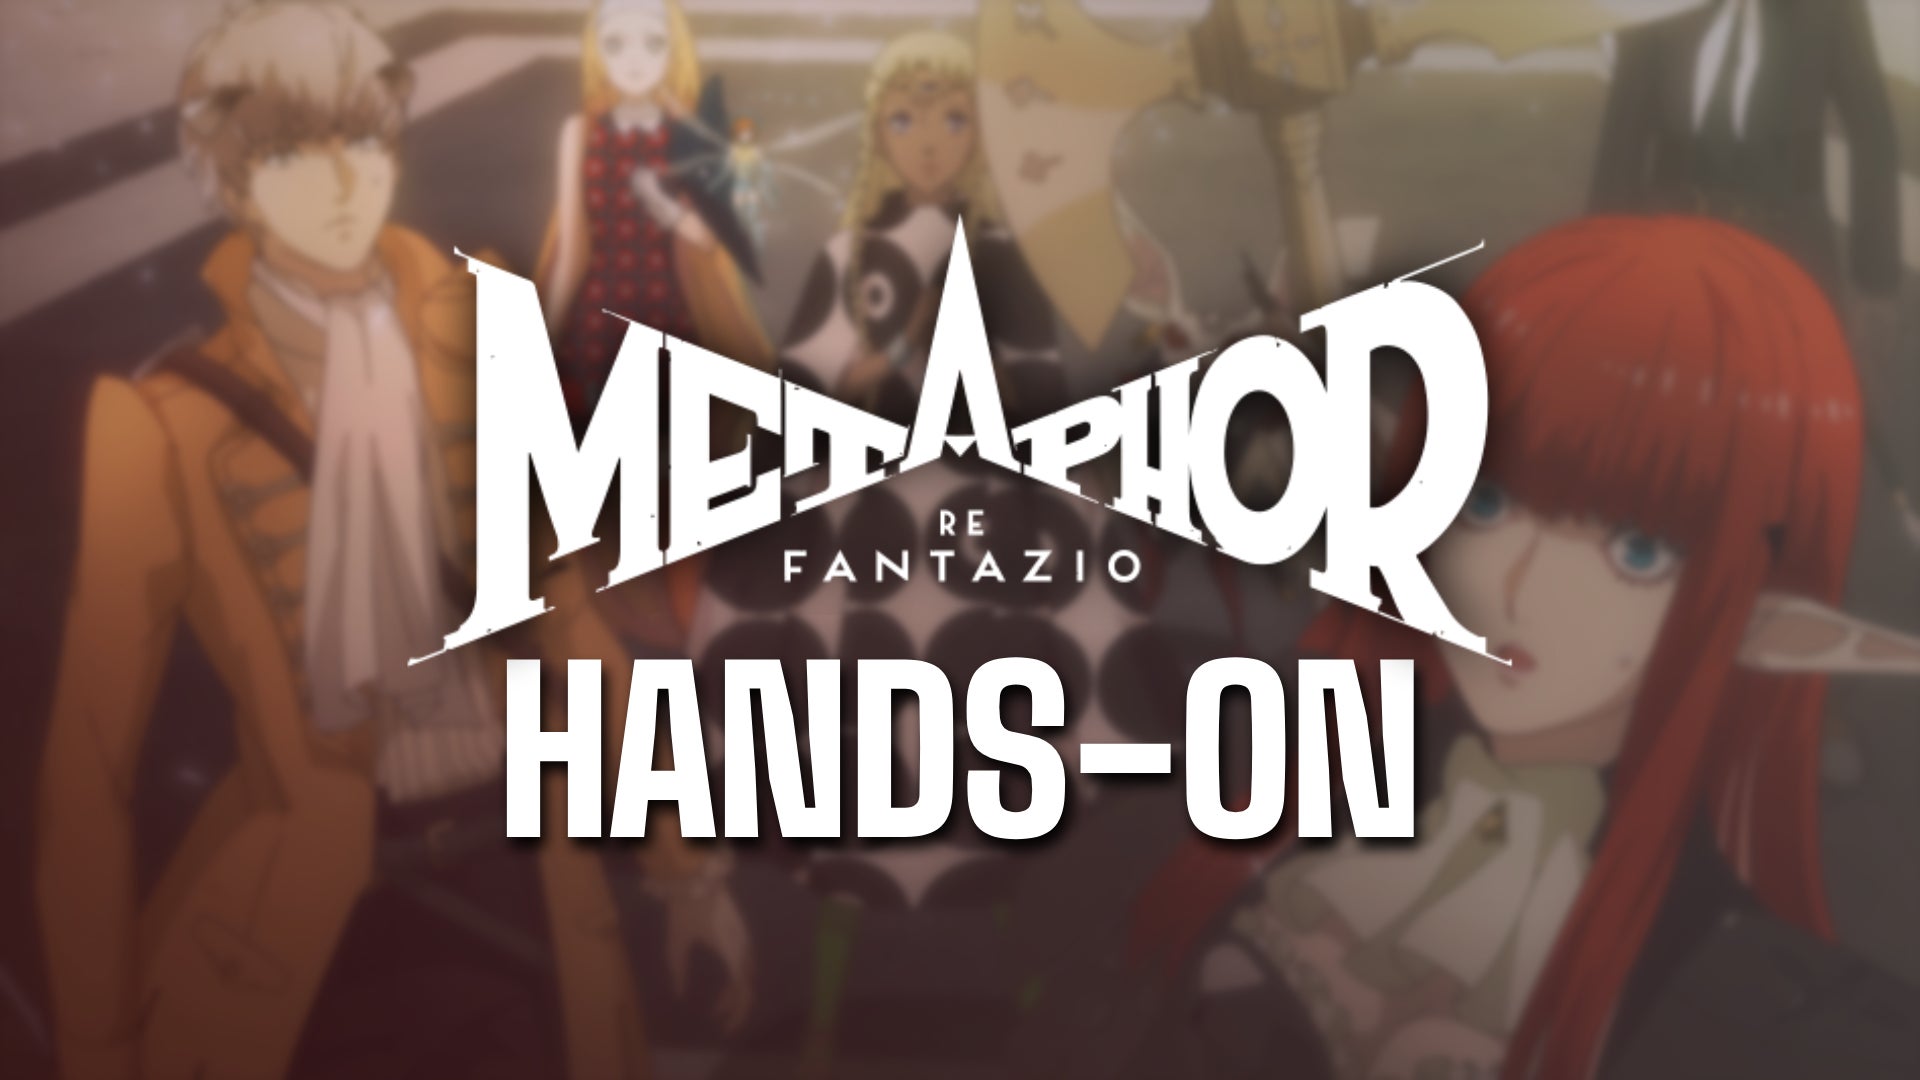 Metaphor ReFantazio plays like Persona and Shin Megami Tensei's greatest  hits – and that's a good thing when it's a compilation of absolute bangers  | VG247